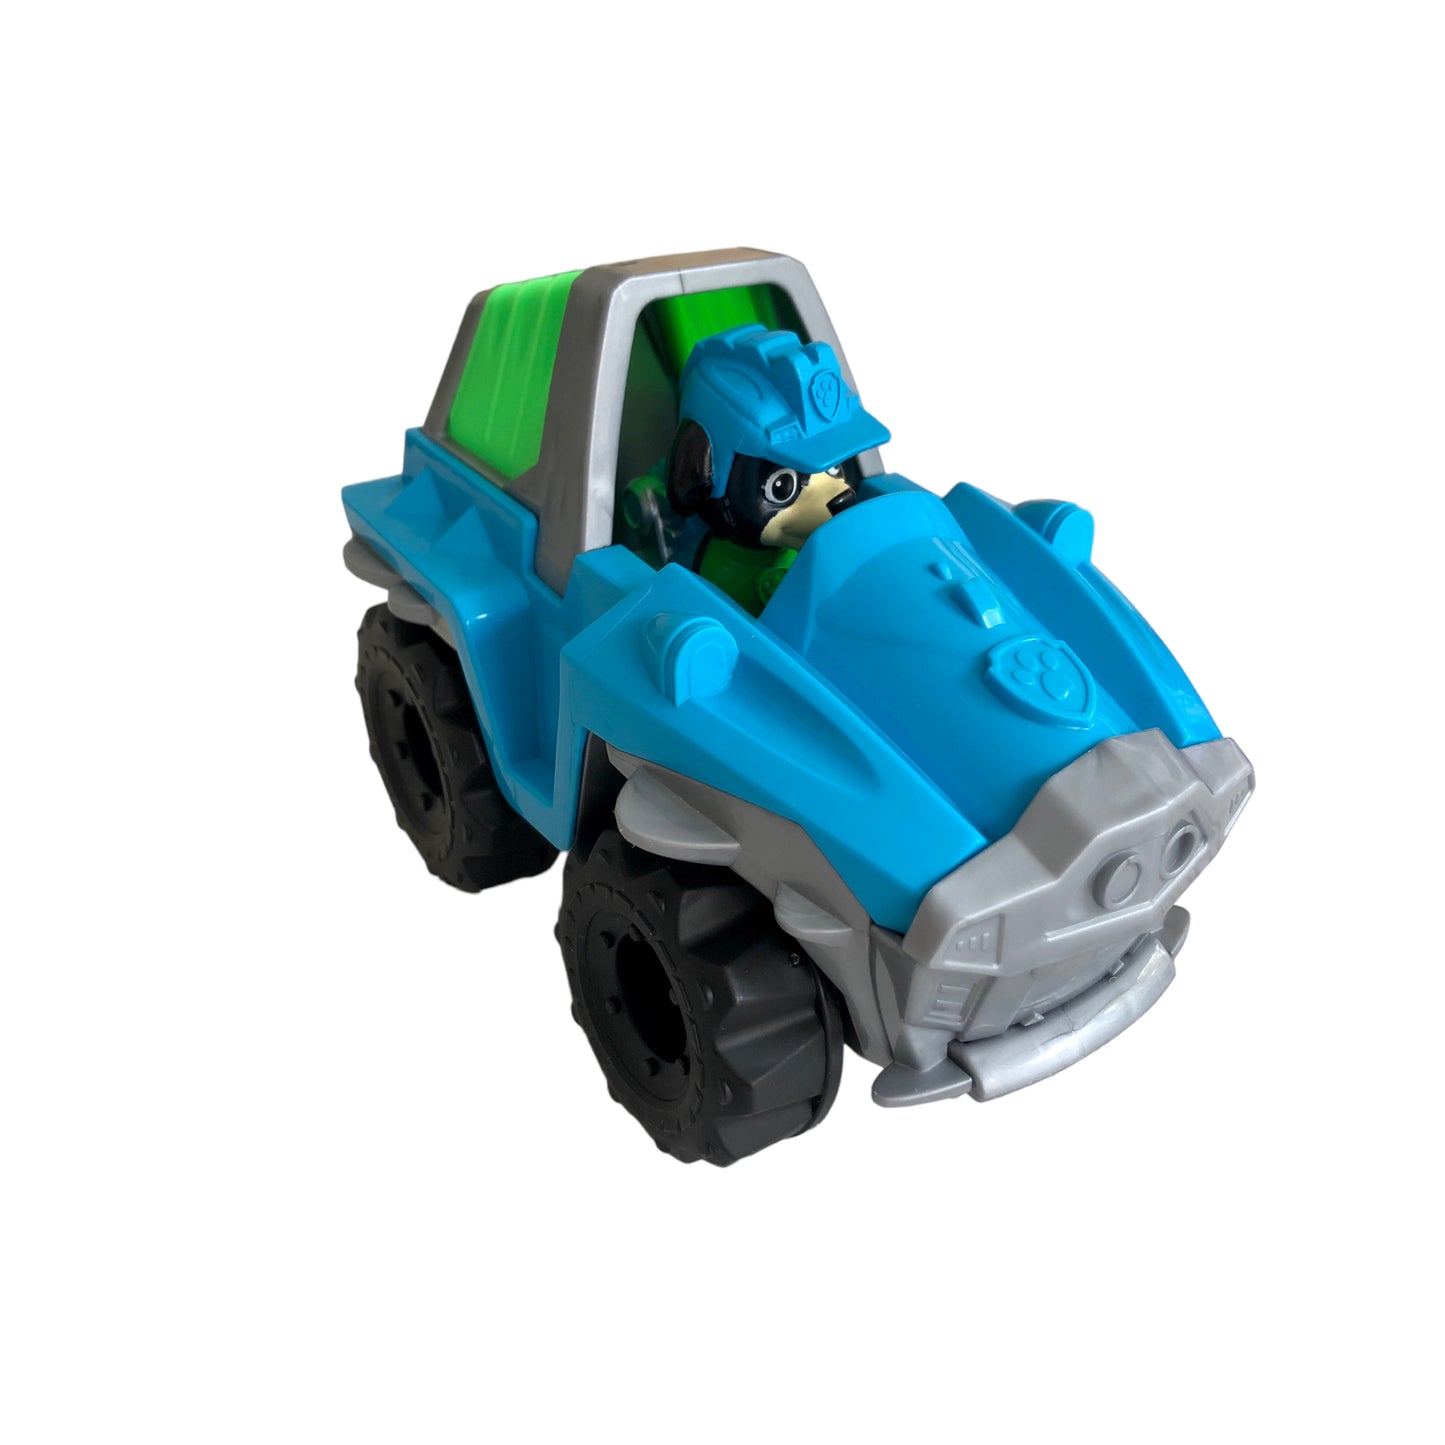 Paw Patrol - Rex and his dinosaur Rescue Vehicle